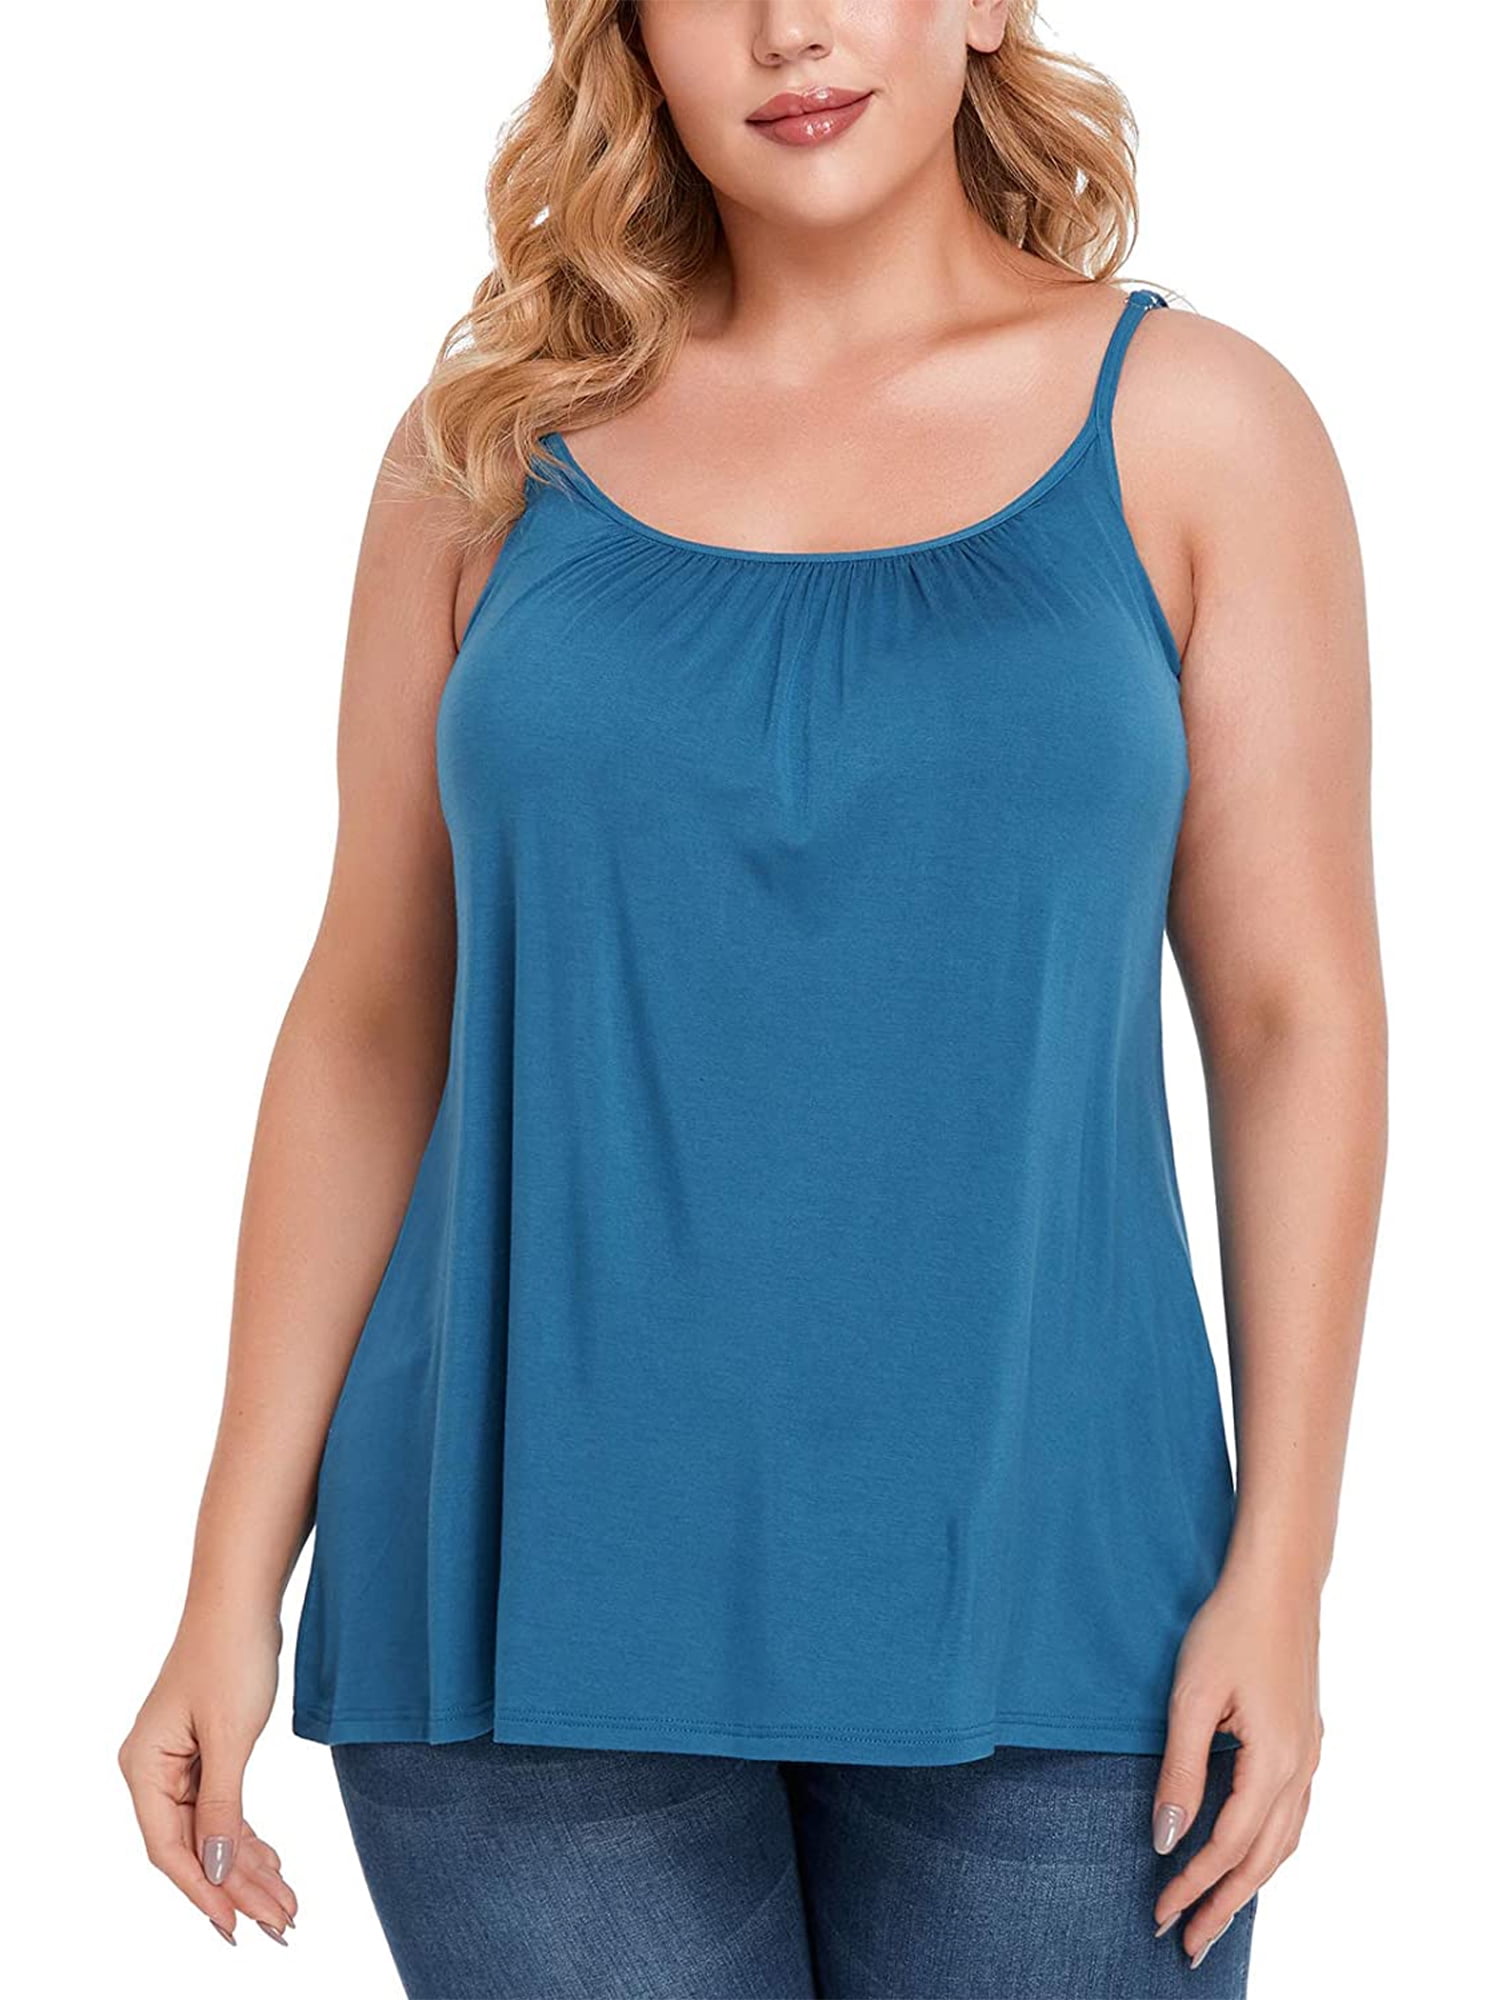 COMFREE Camisole with Built in Padded Bra for Women Plus Size